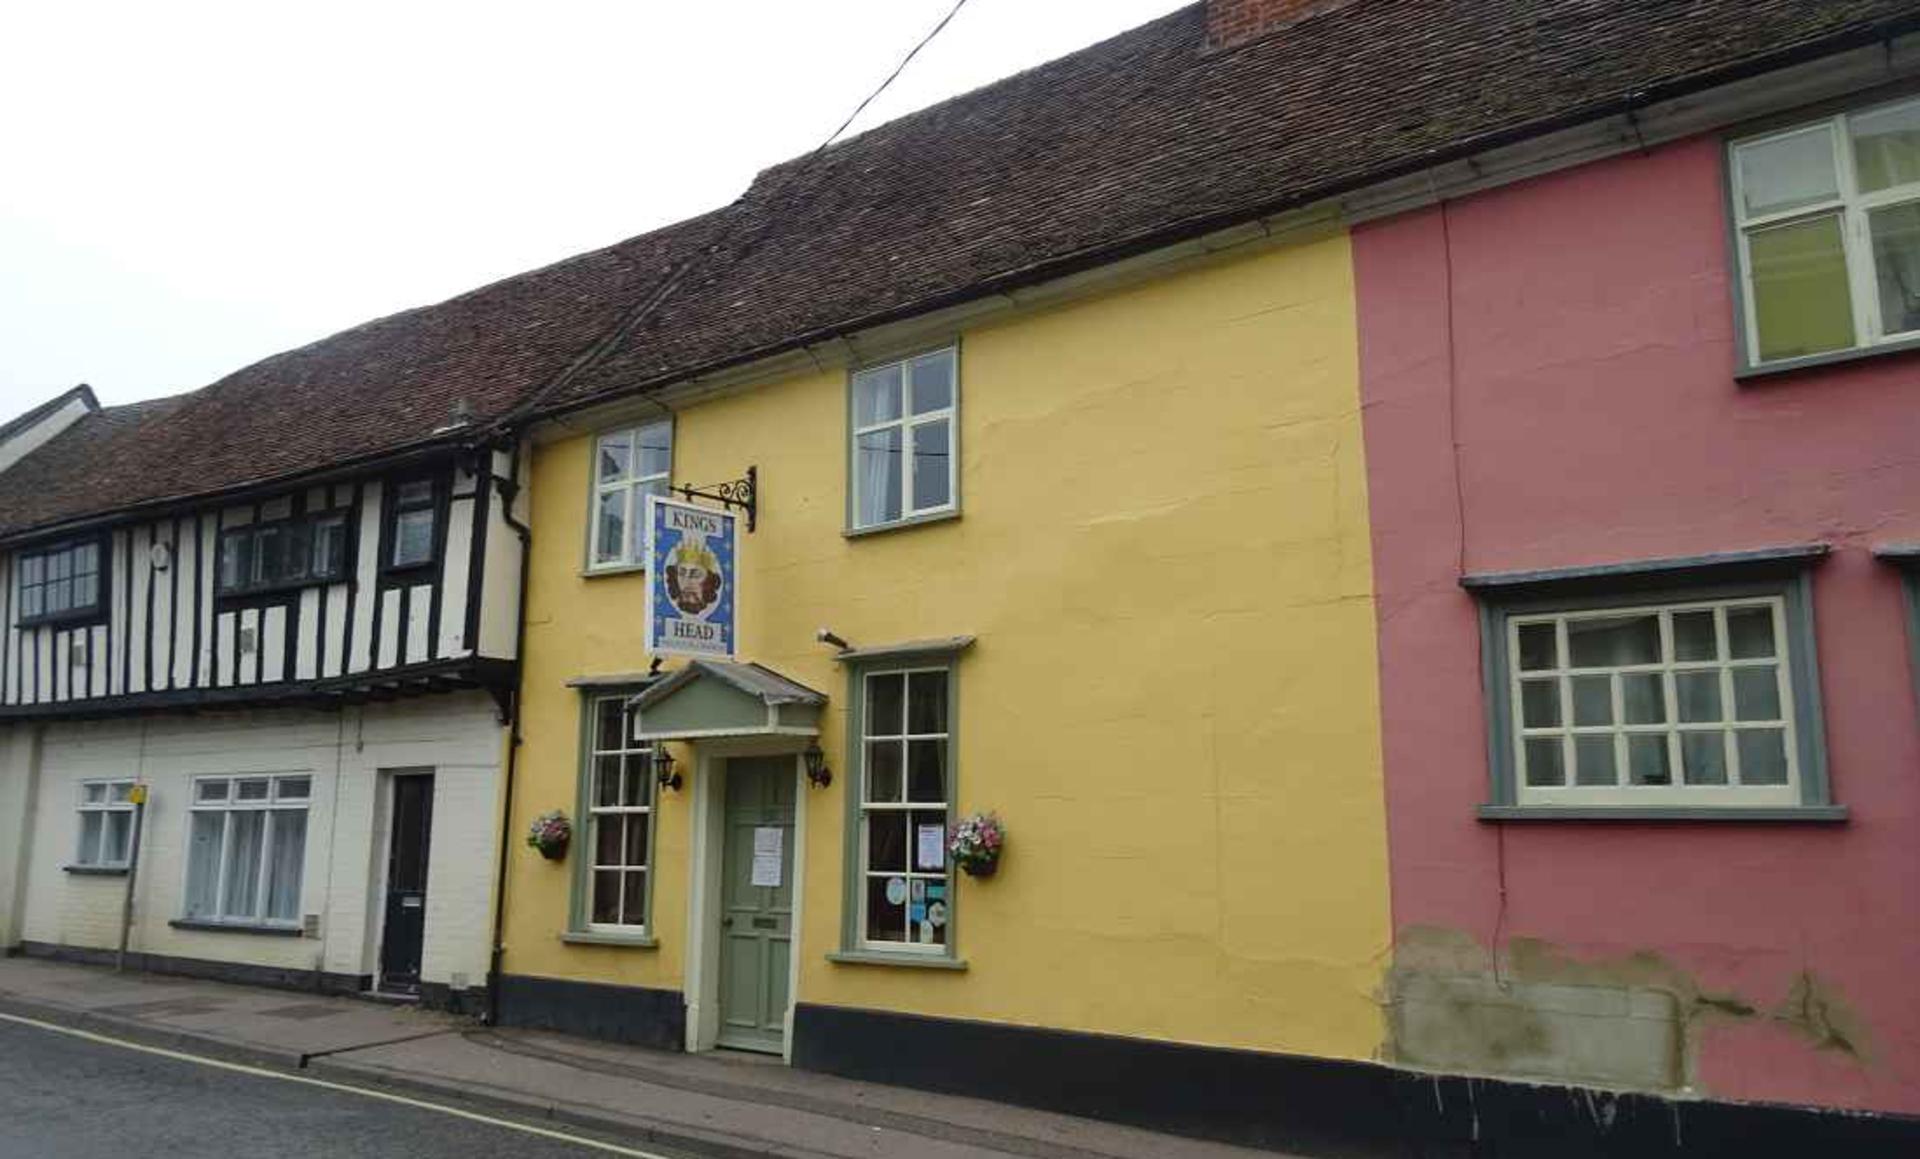 Suffolk pub and microbrewery up for sale